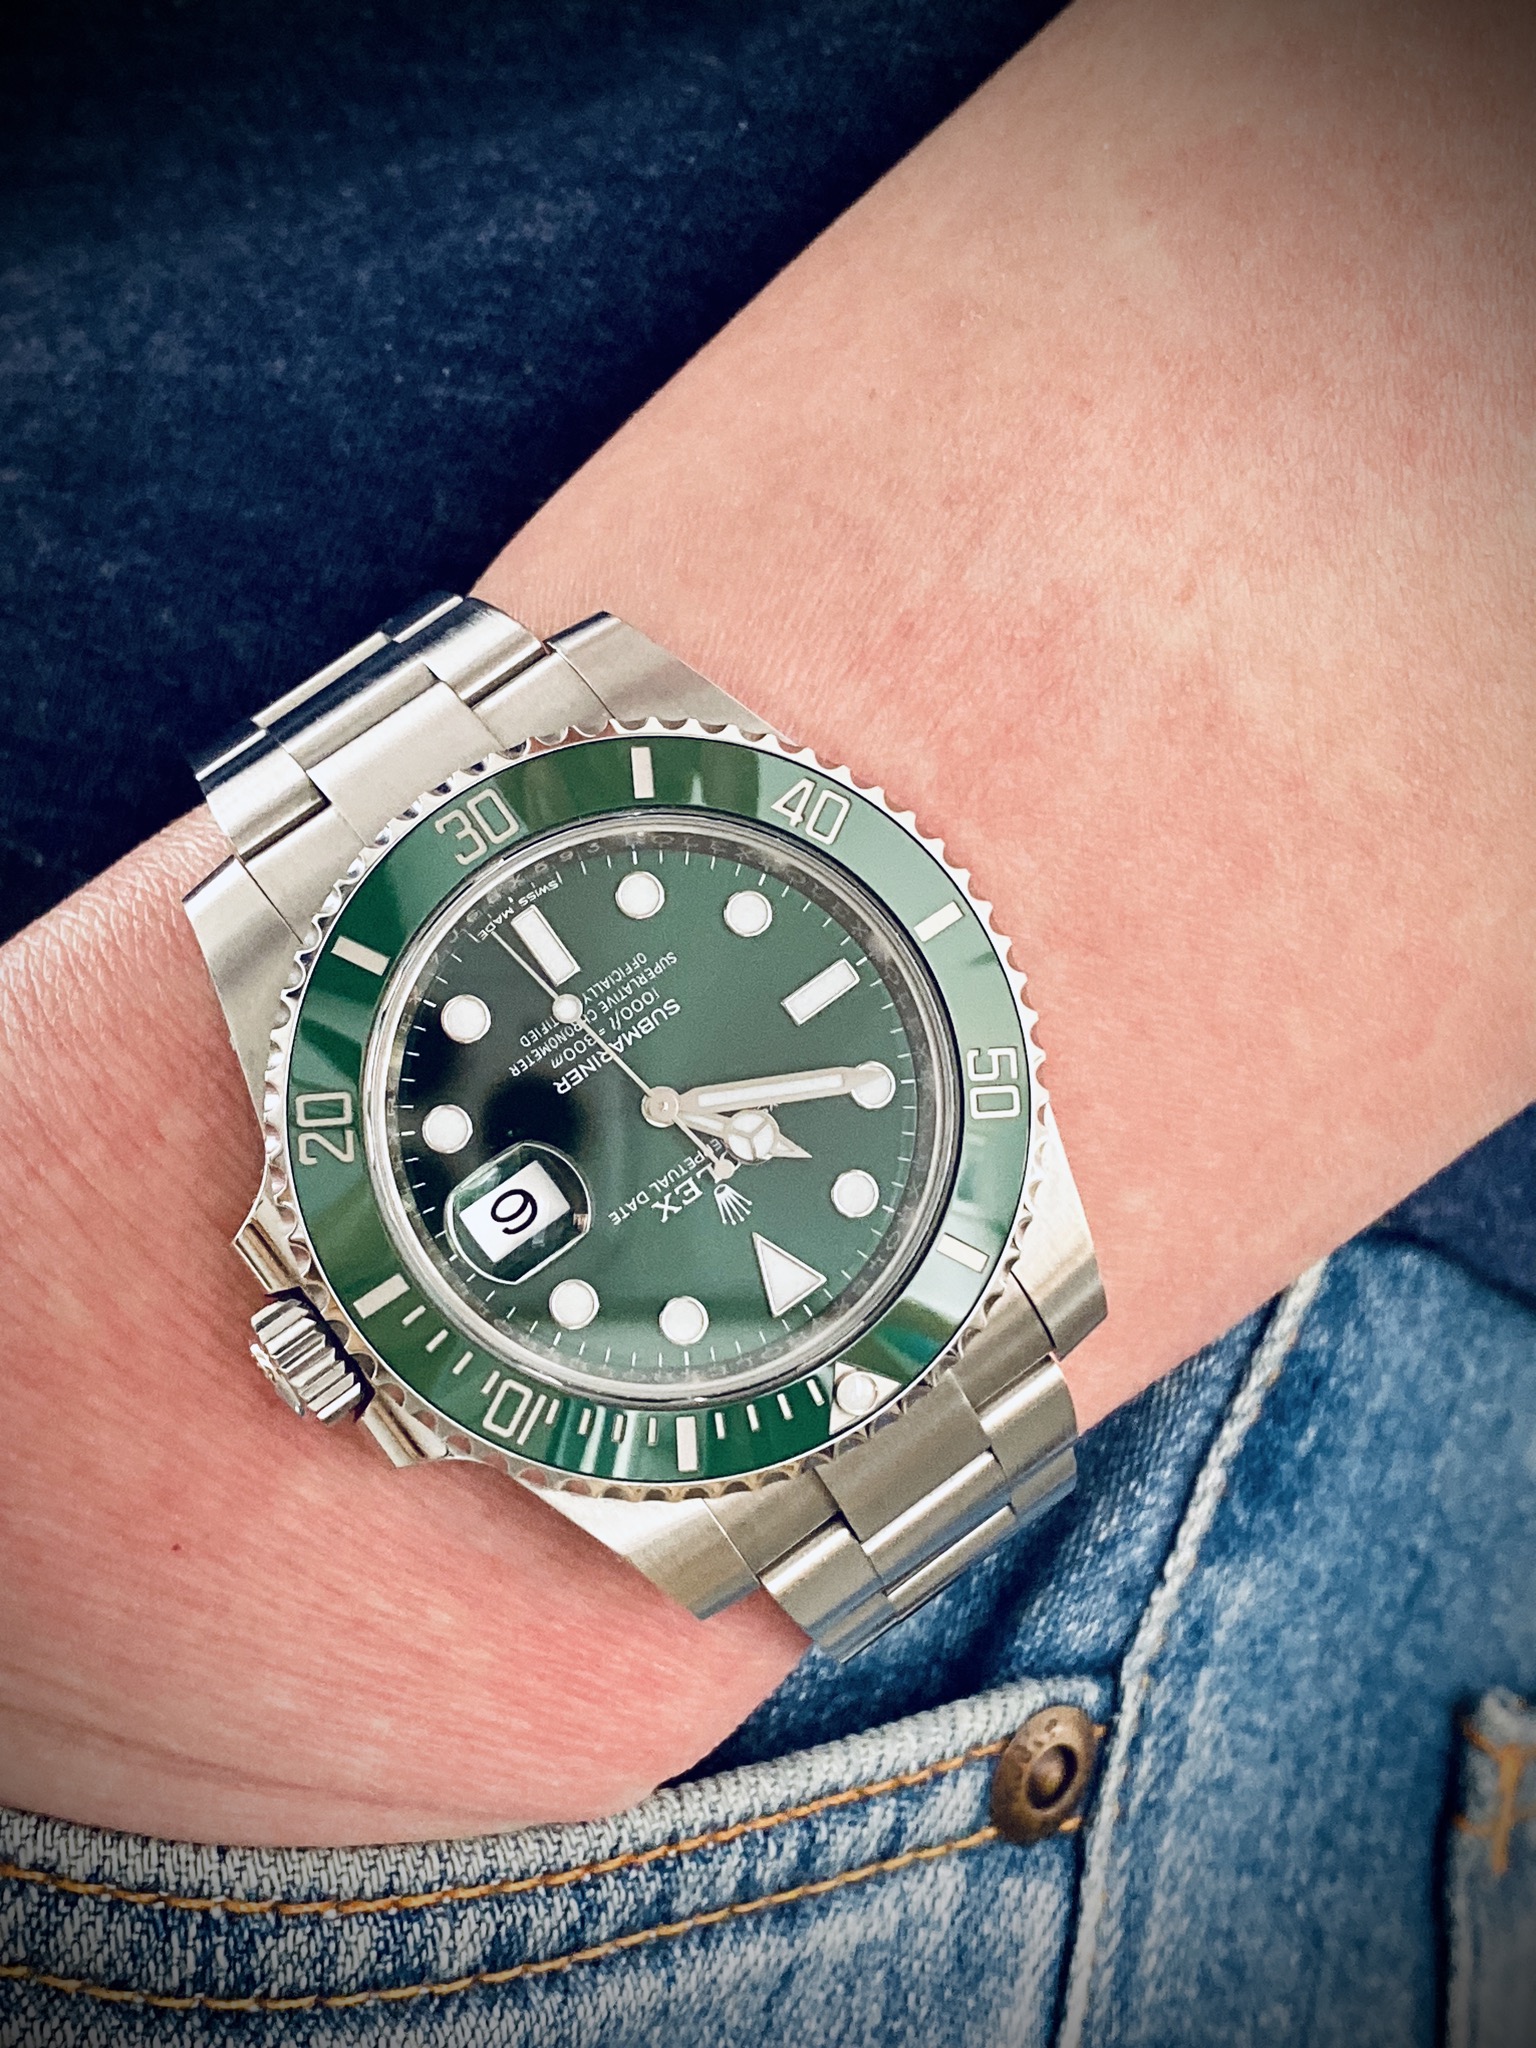 Owner Review: Rolex Submariner Hulk 116610 LV - FIFTH WRIST